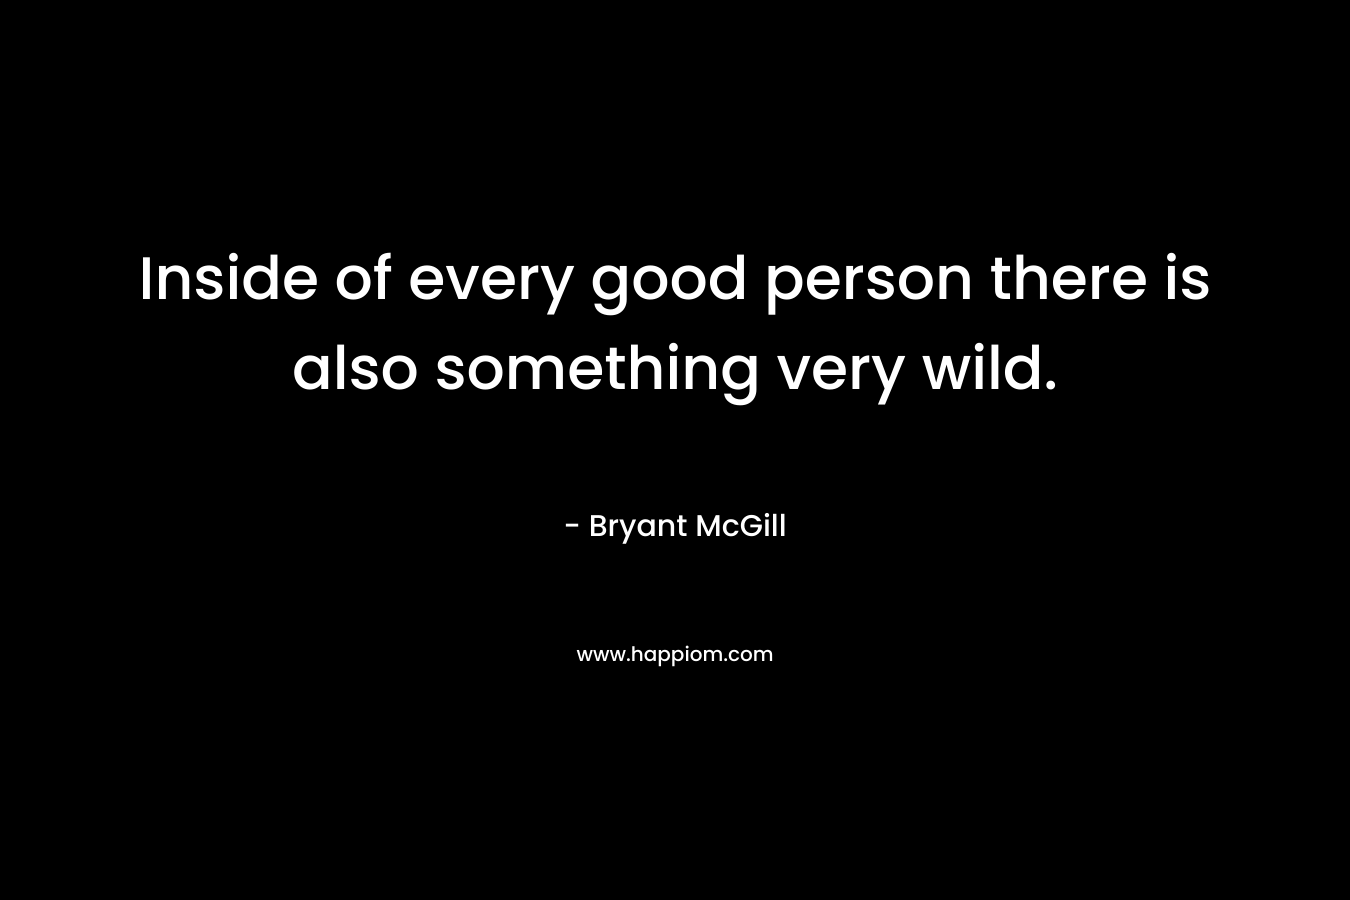 Inside of every good person there is also something very wild. – Bryant McGill